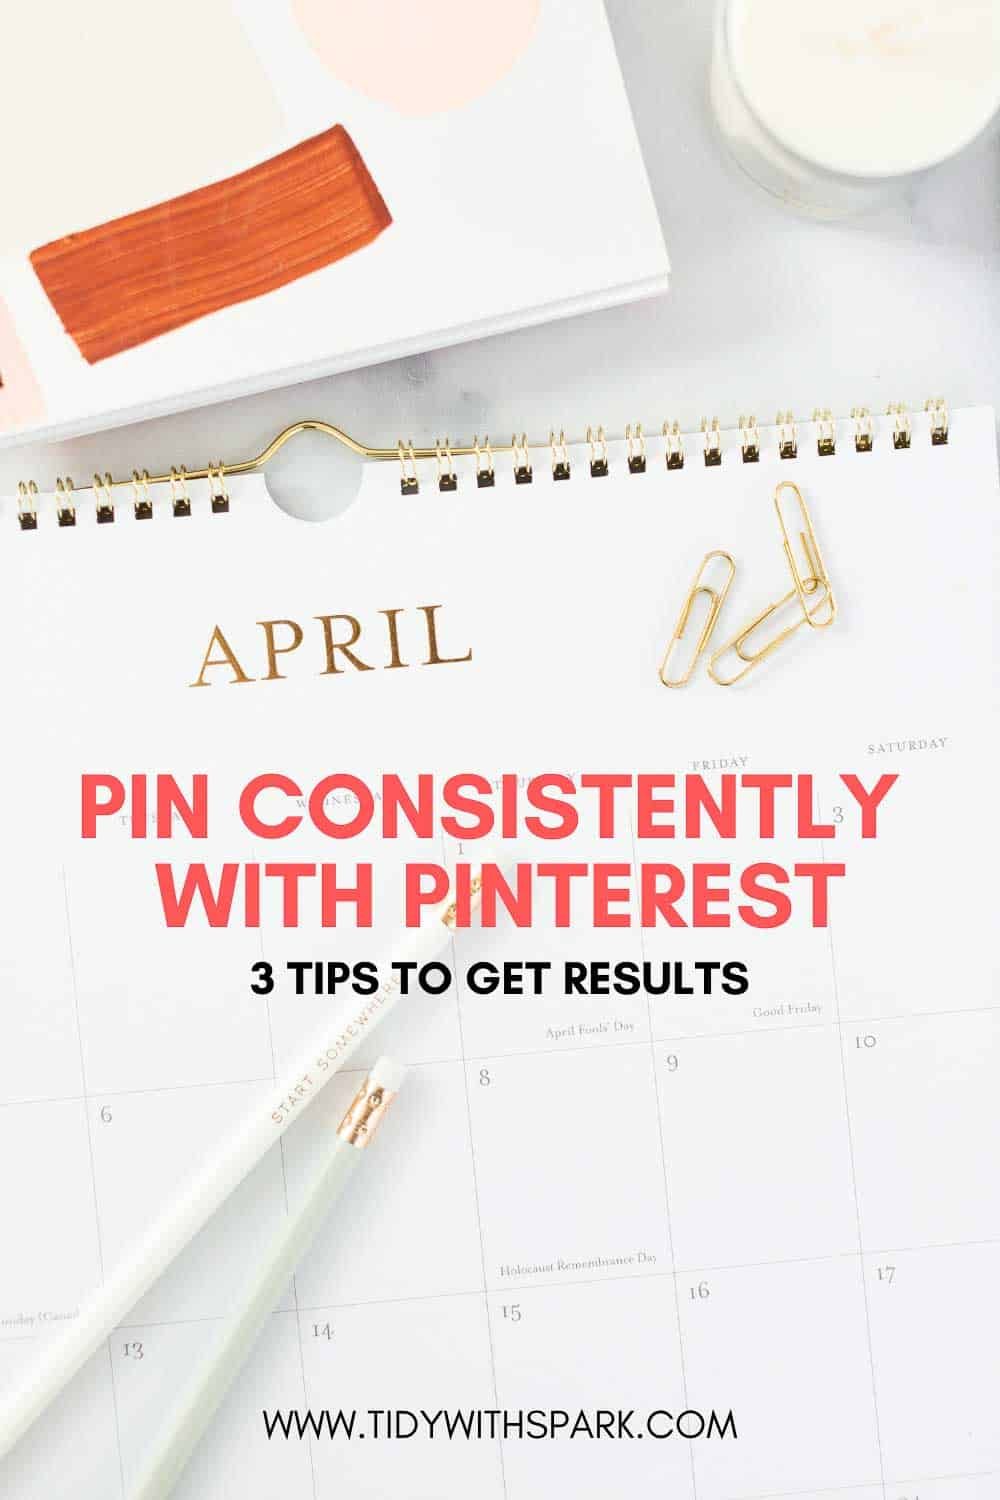 Promotional image for how to boost consistency on Pinterest for tidy with spark blog